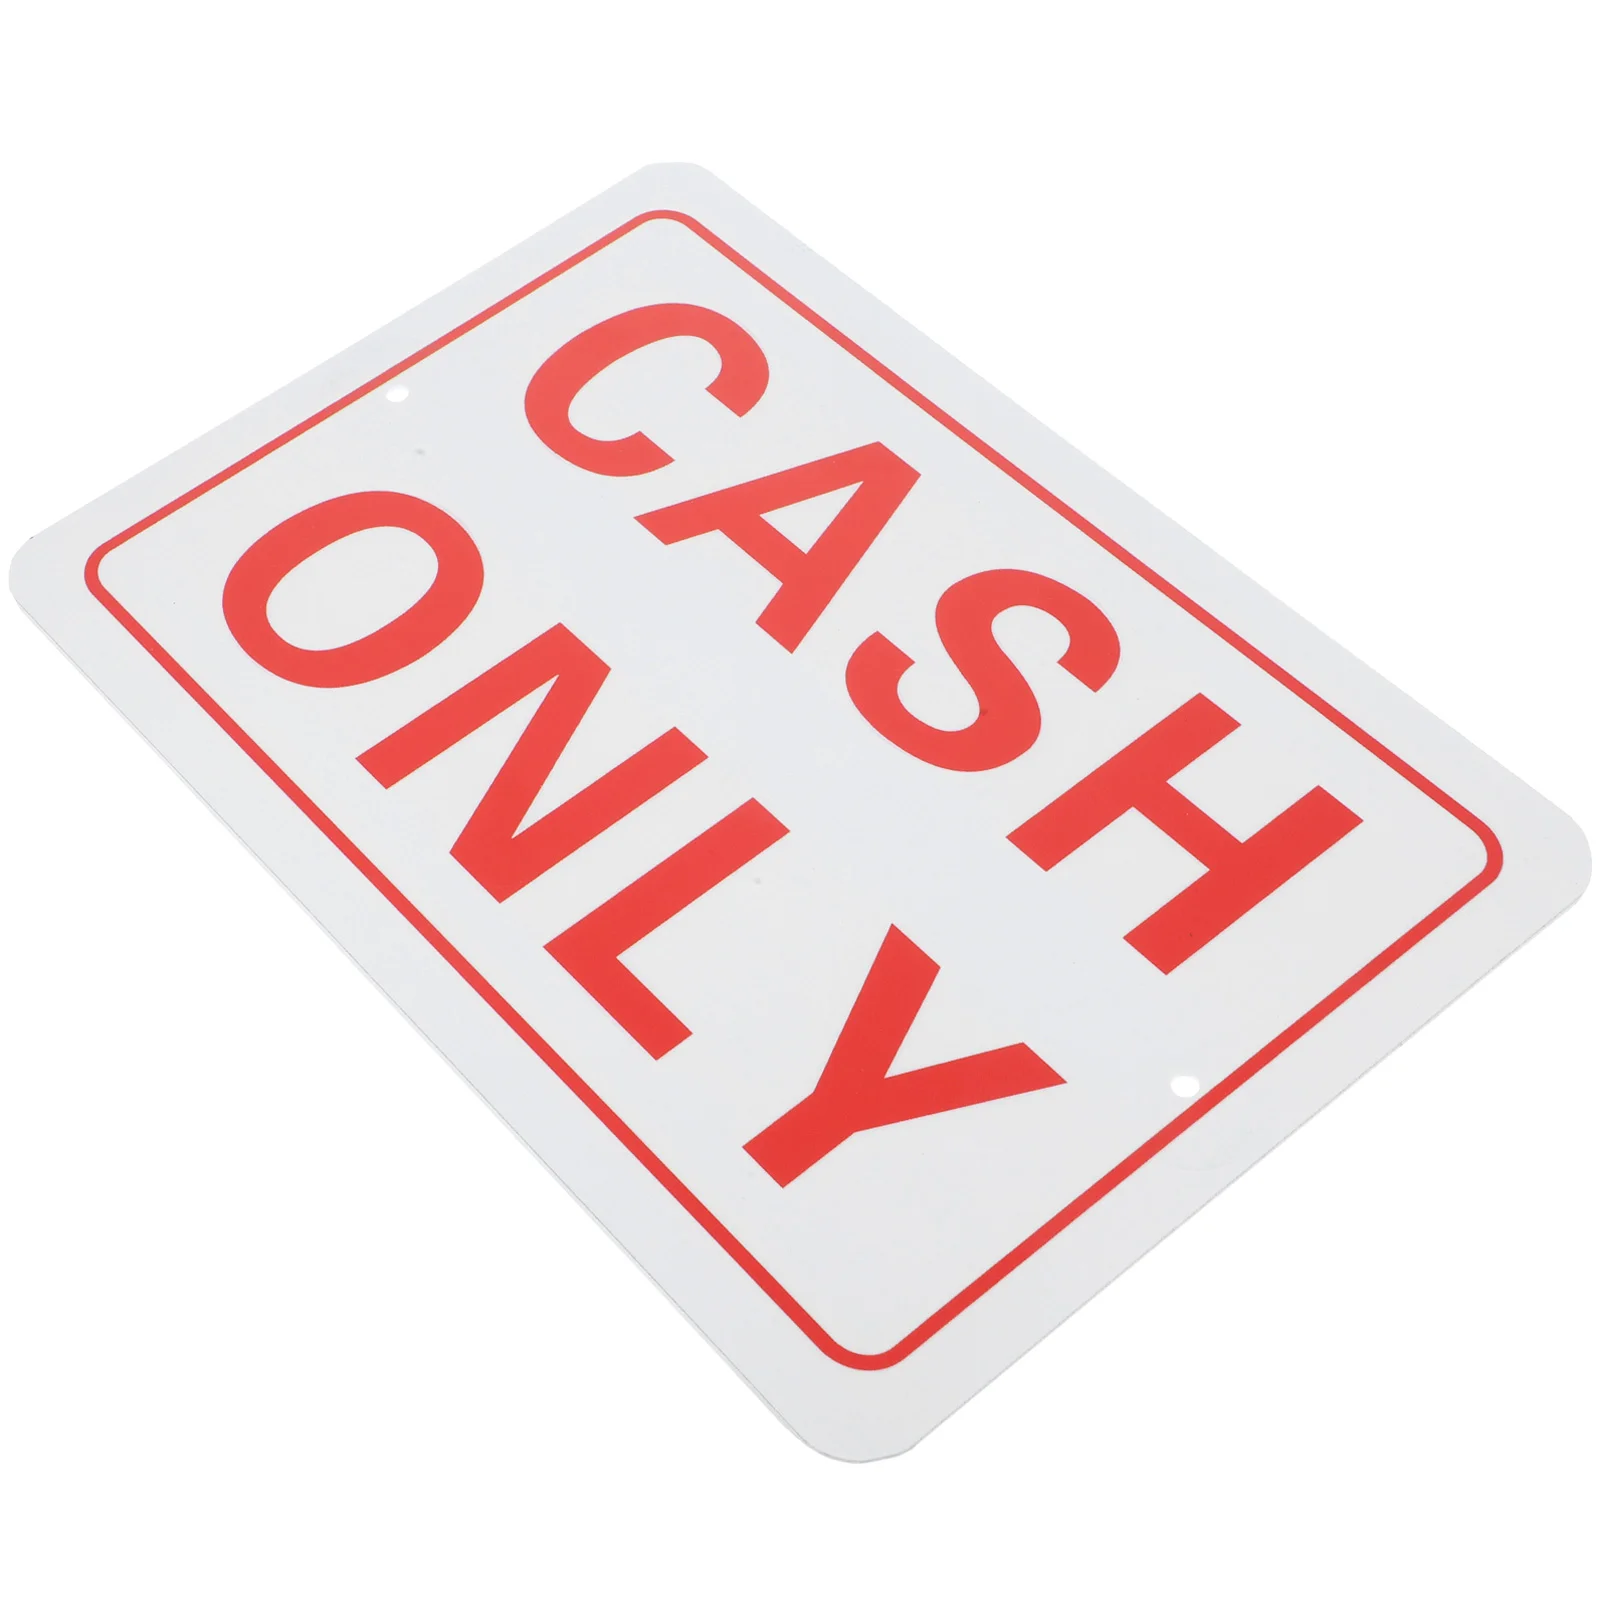 

Cash Only Sign Business Cashier Sign No Credit Card Checks Payment Sign for Store Shop